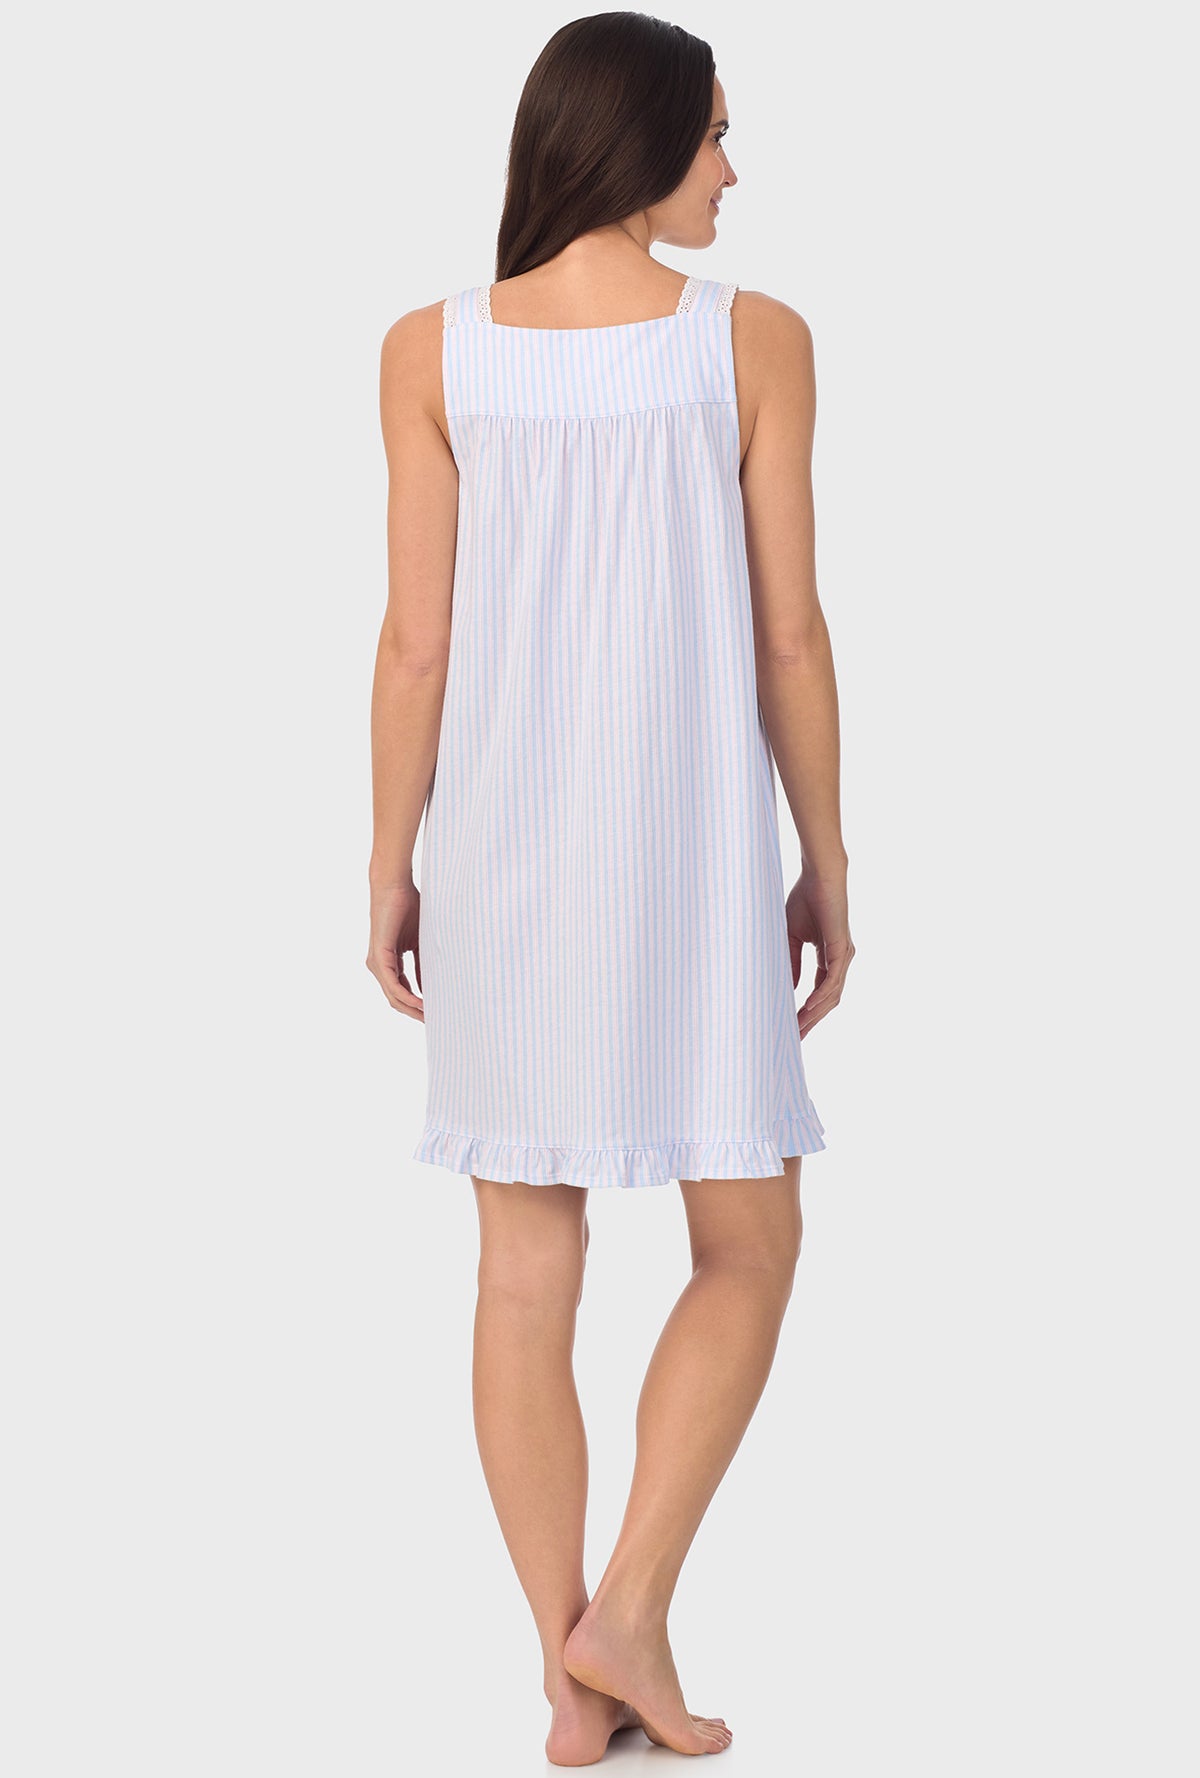 A lady wearing white sleeveless Blossom Stripes Sleeveless Chemise with Cotton Blue print